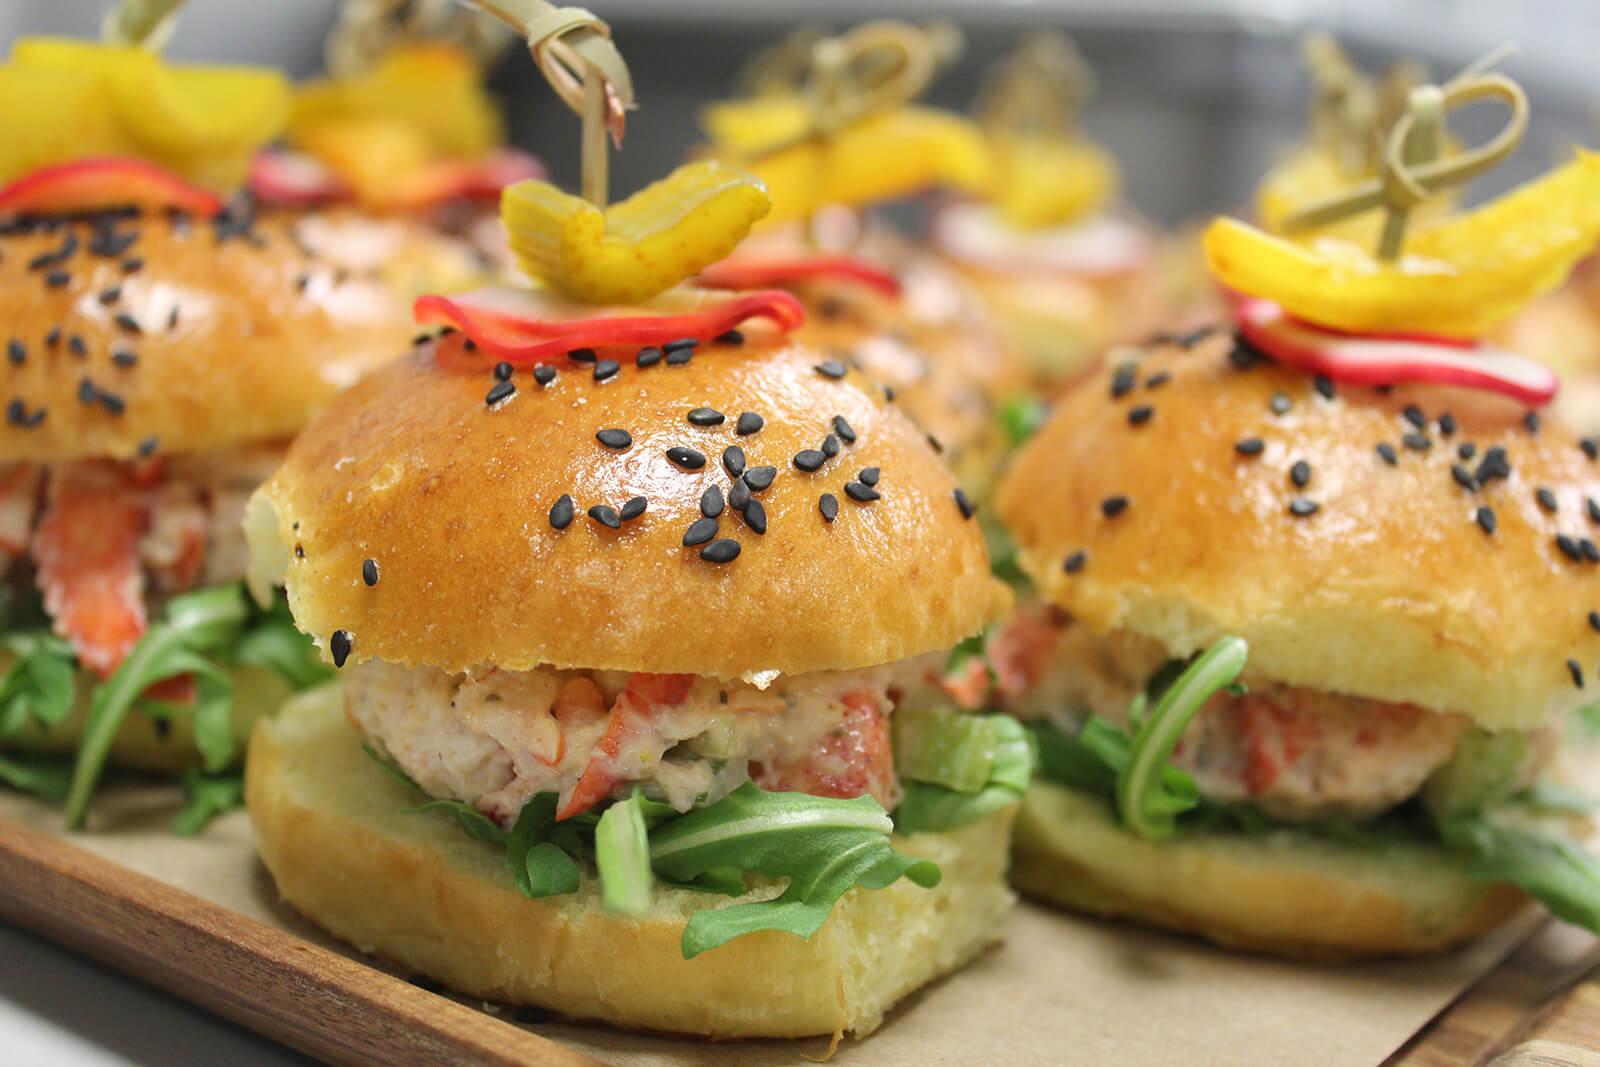 Lobster roll sliders with poppy seed buns and pickle garnish